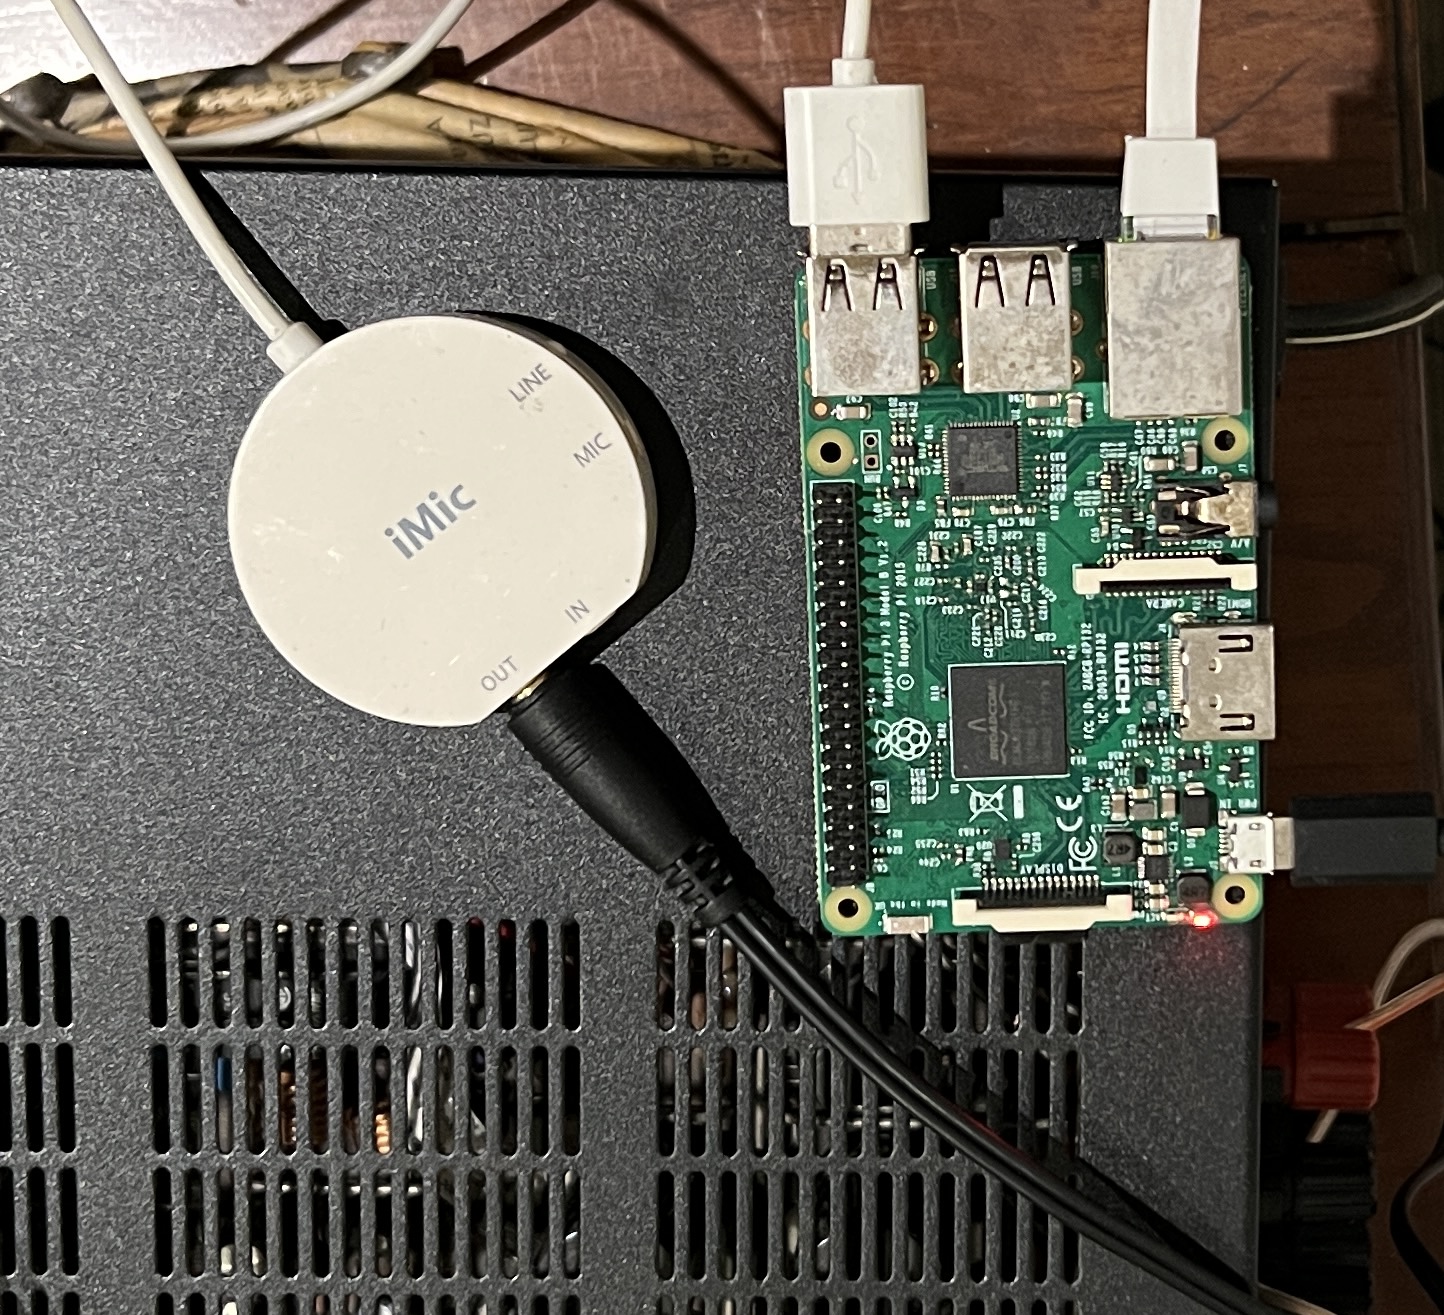 A photo of the Pi plugged into a USB DAC, which is then plugged into a 3.5mm audio jack.